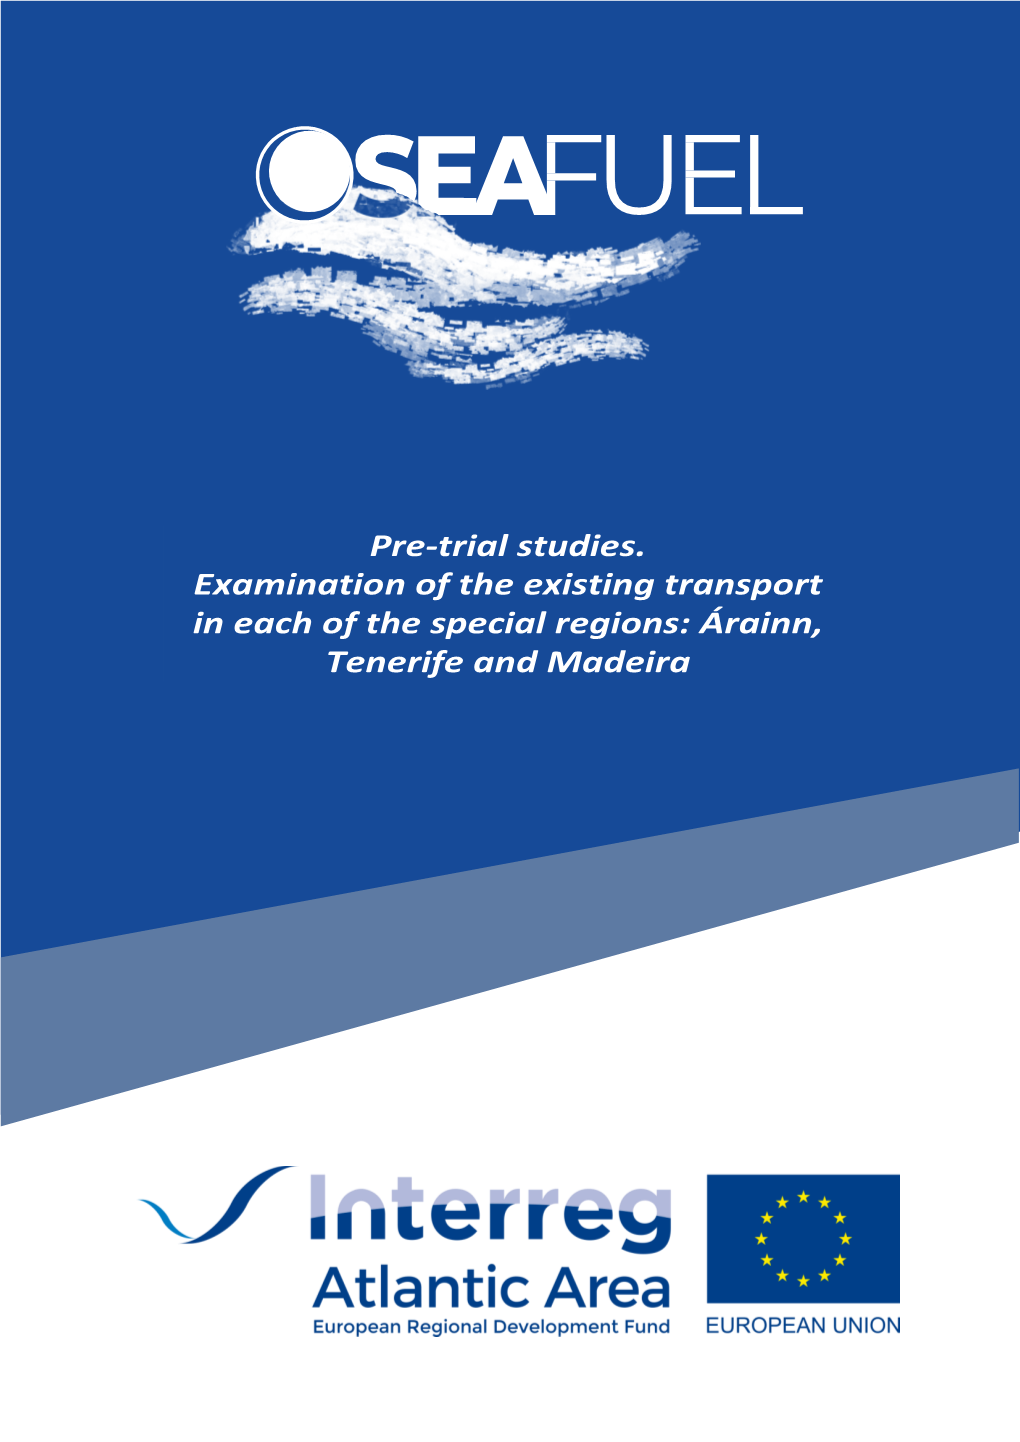 Pre-Trial Studies. Examination of the Existing Transport in Each of the Special Regions: Árainn, Tenerife and Madeira